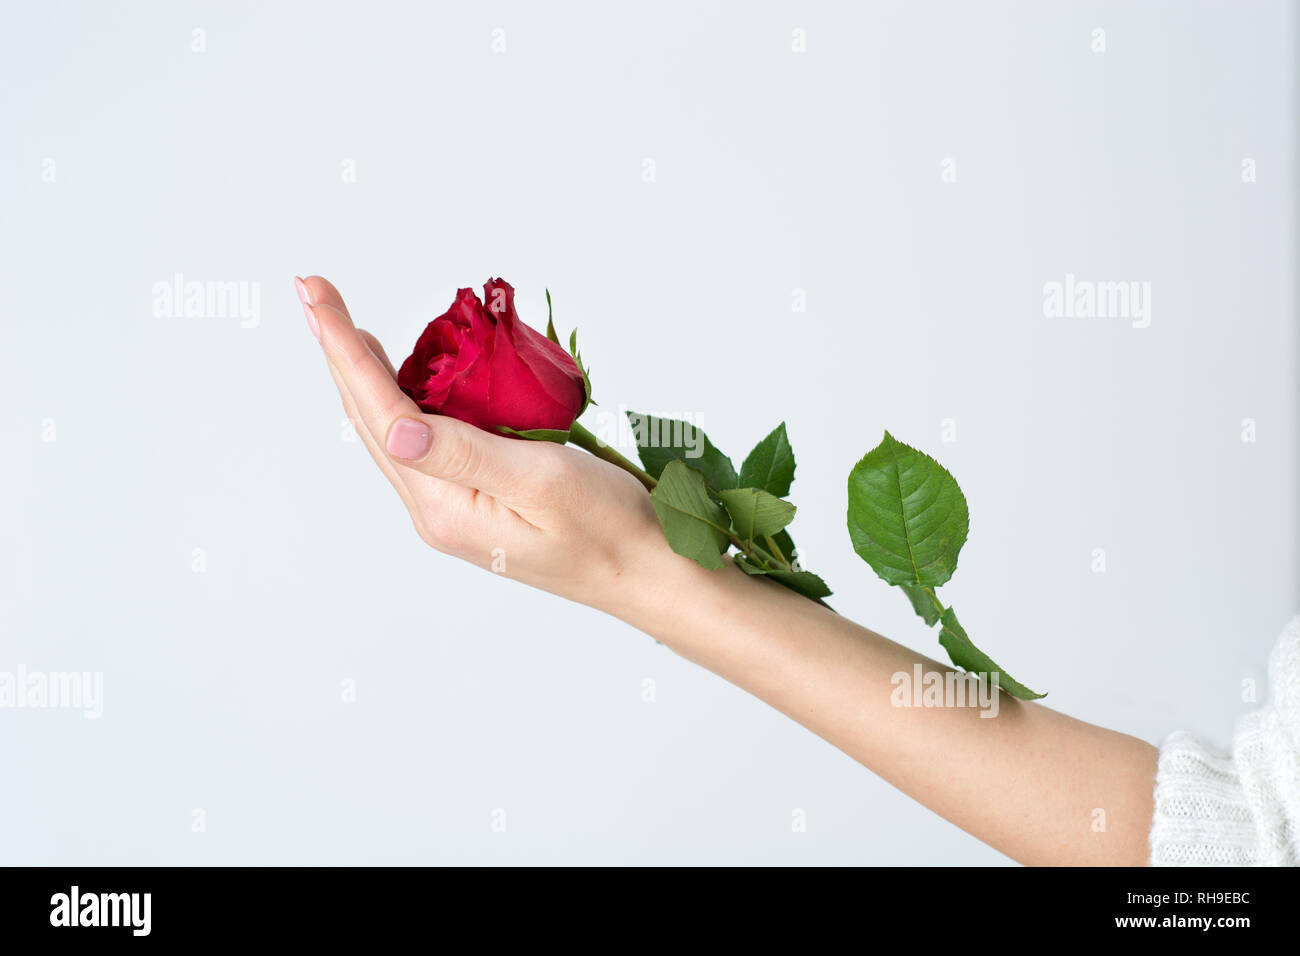 Pink And Red Roses Stock Photo 66473128 : Shutterstock | Red roses wallpaper,  Pink roses background, Rose flower wallpaper